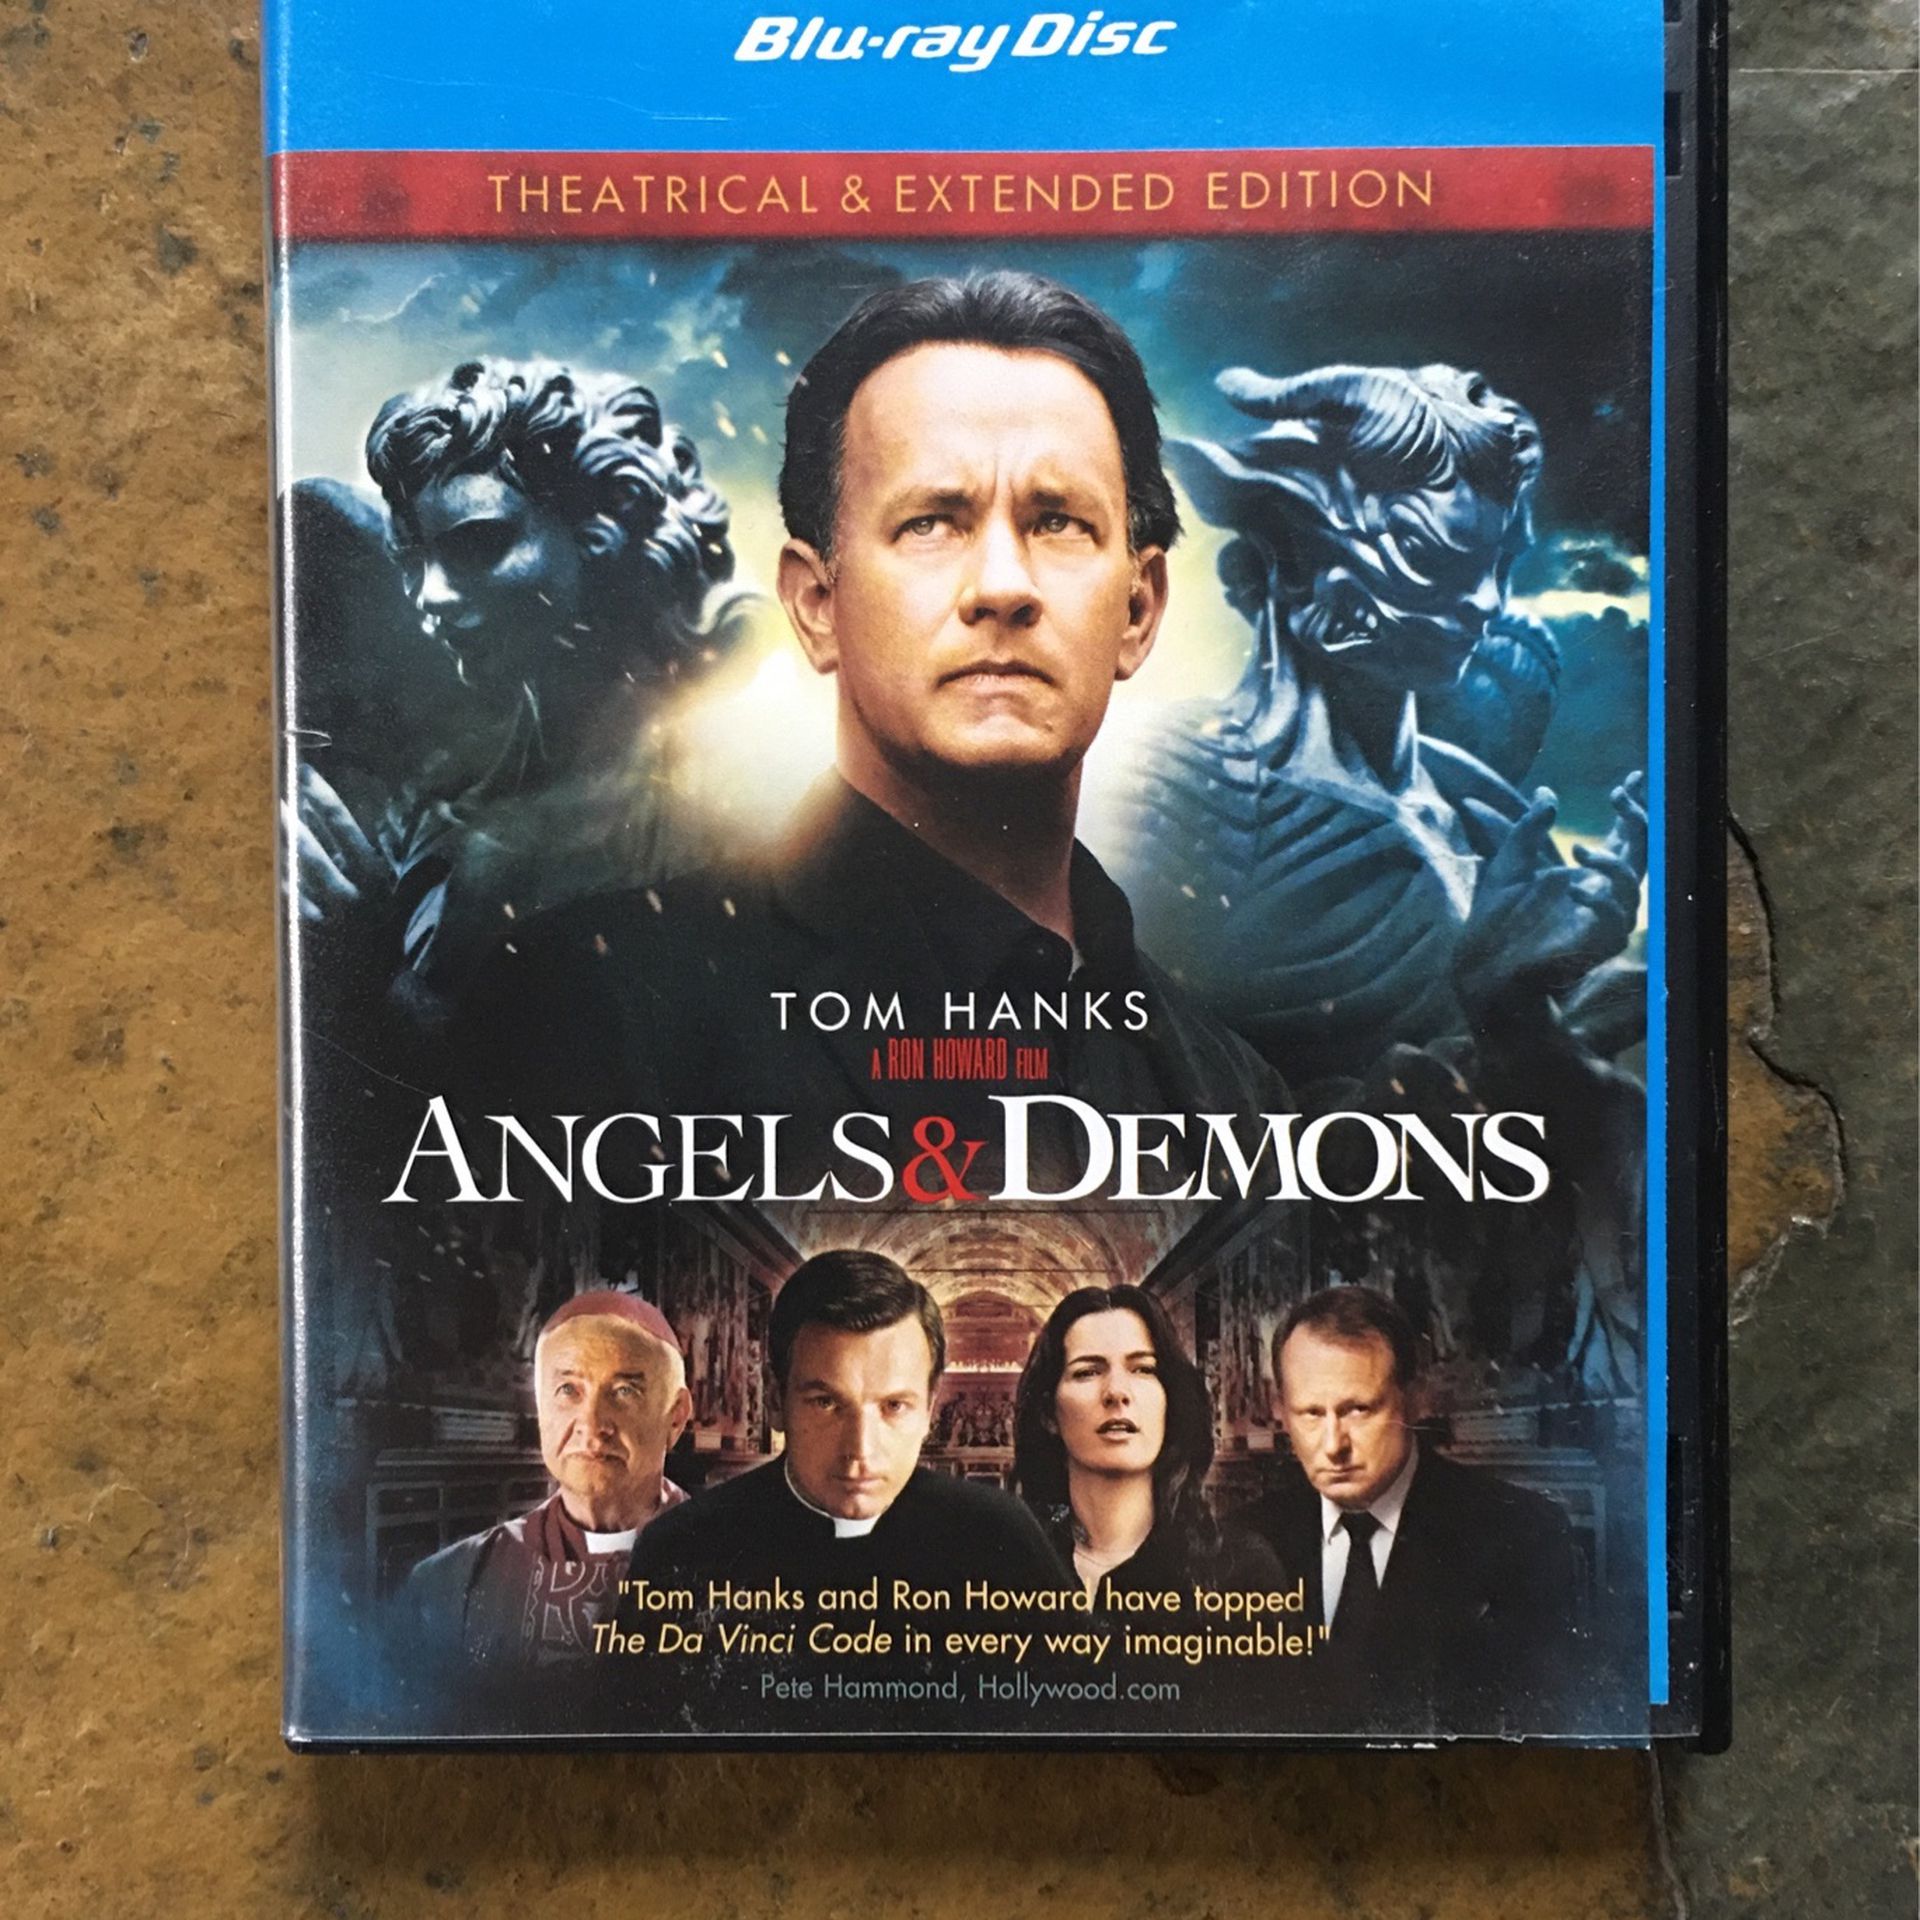 Angels & Demons - Theatrical & Extended Edition Blu Ray